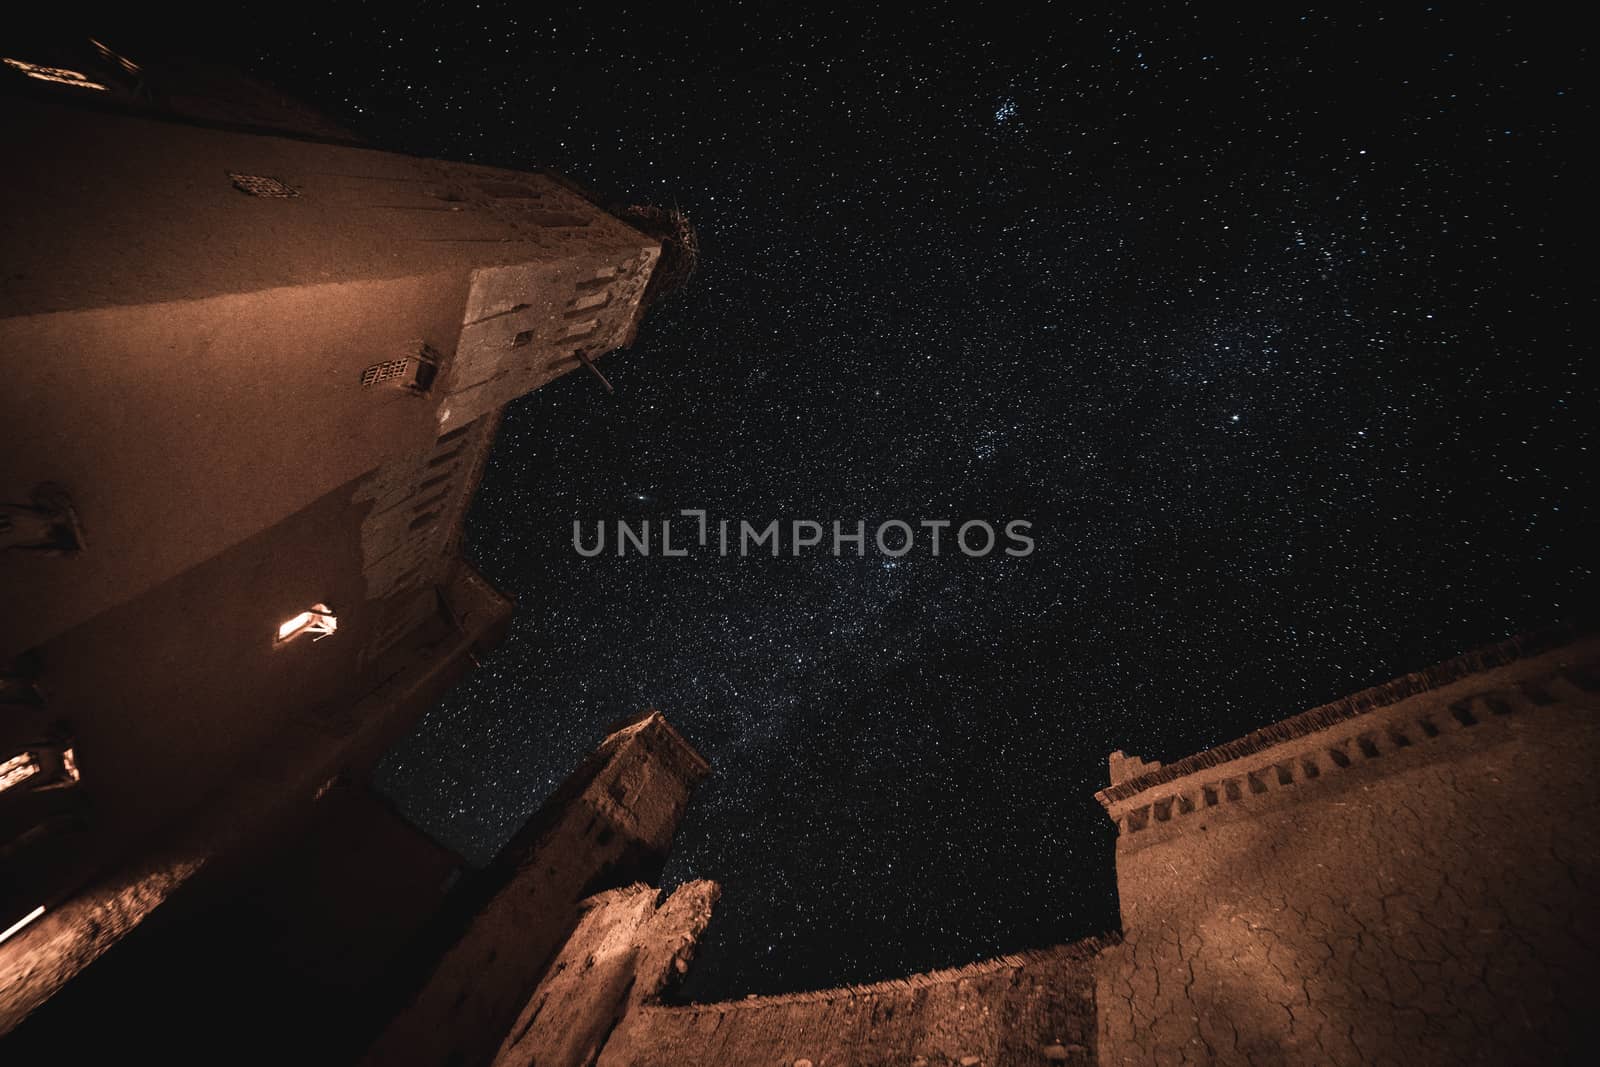 Star photography in the ruins of ksar ait ben haddou